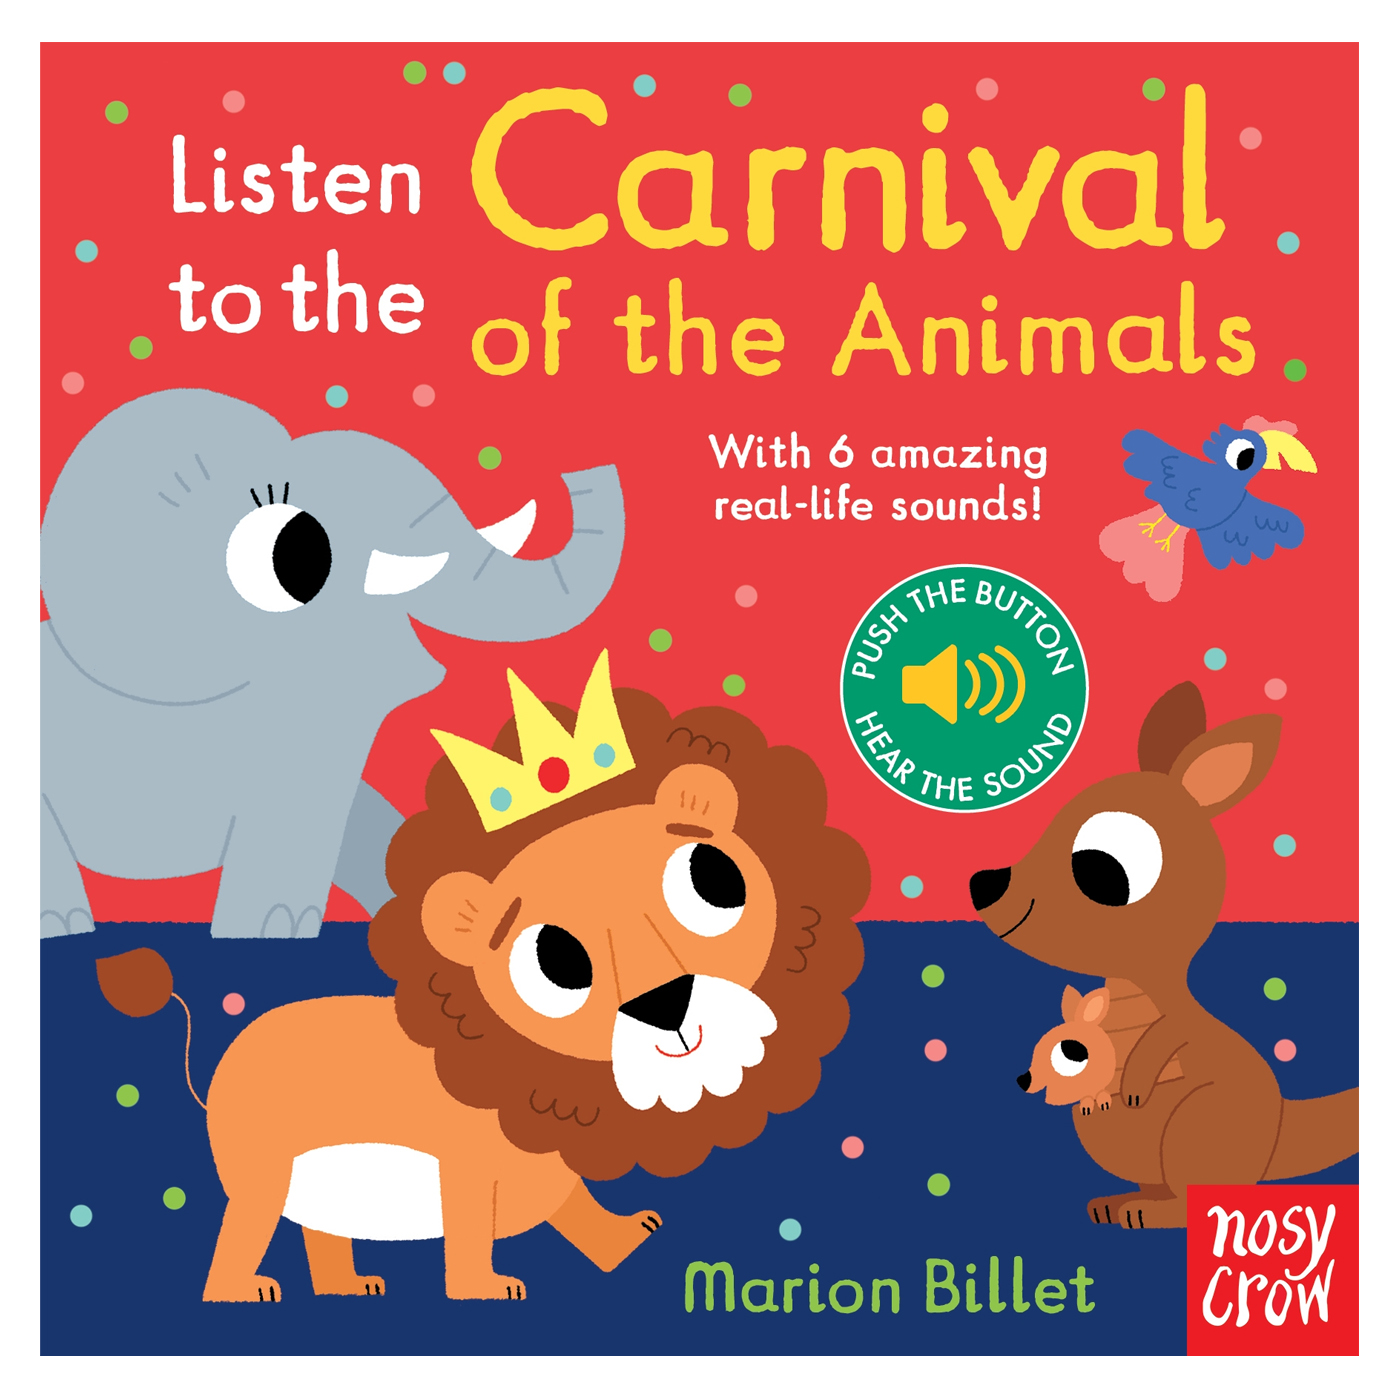  Listen to the: Carnival of the Animals